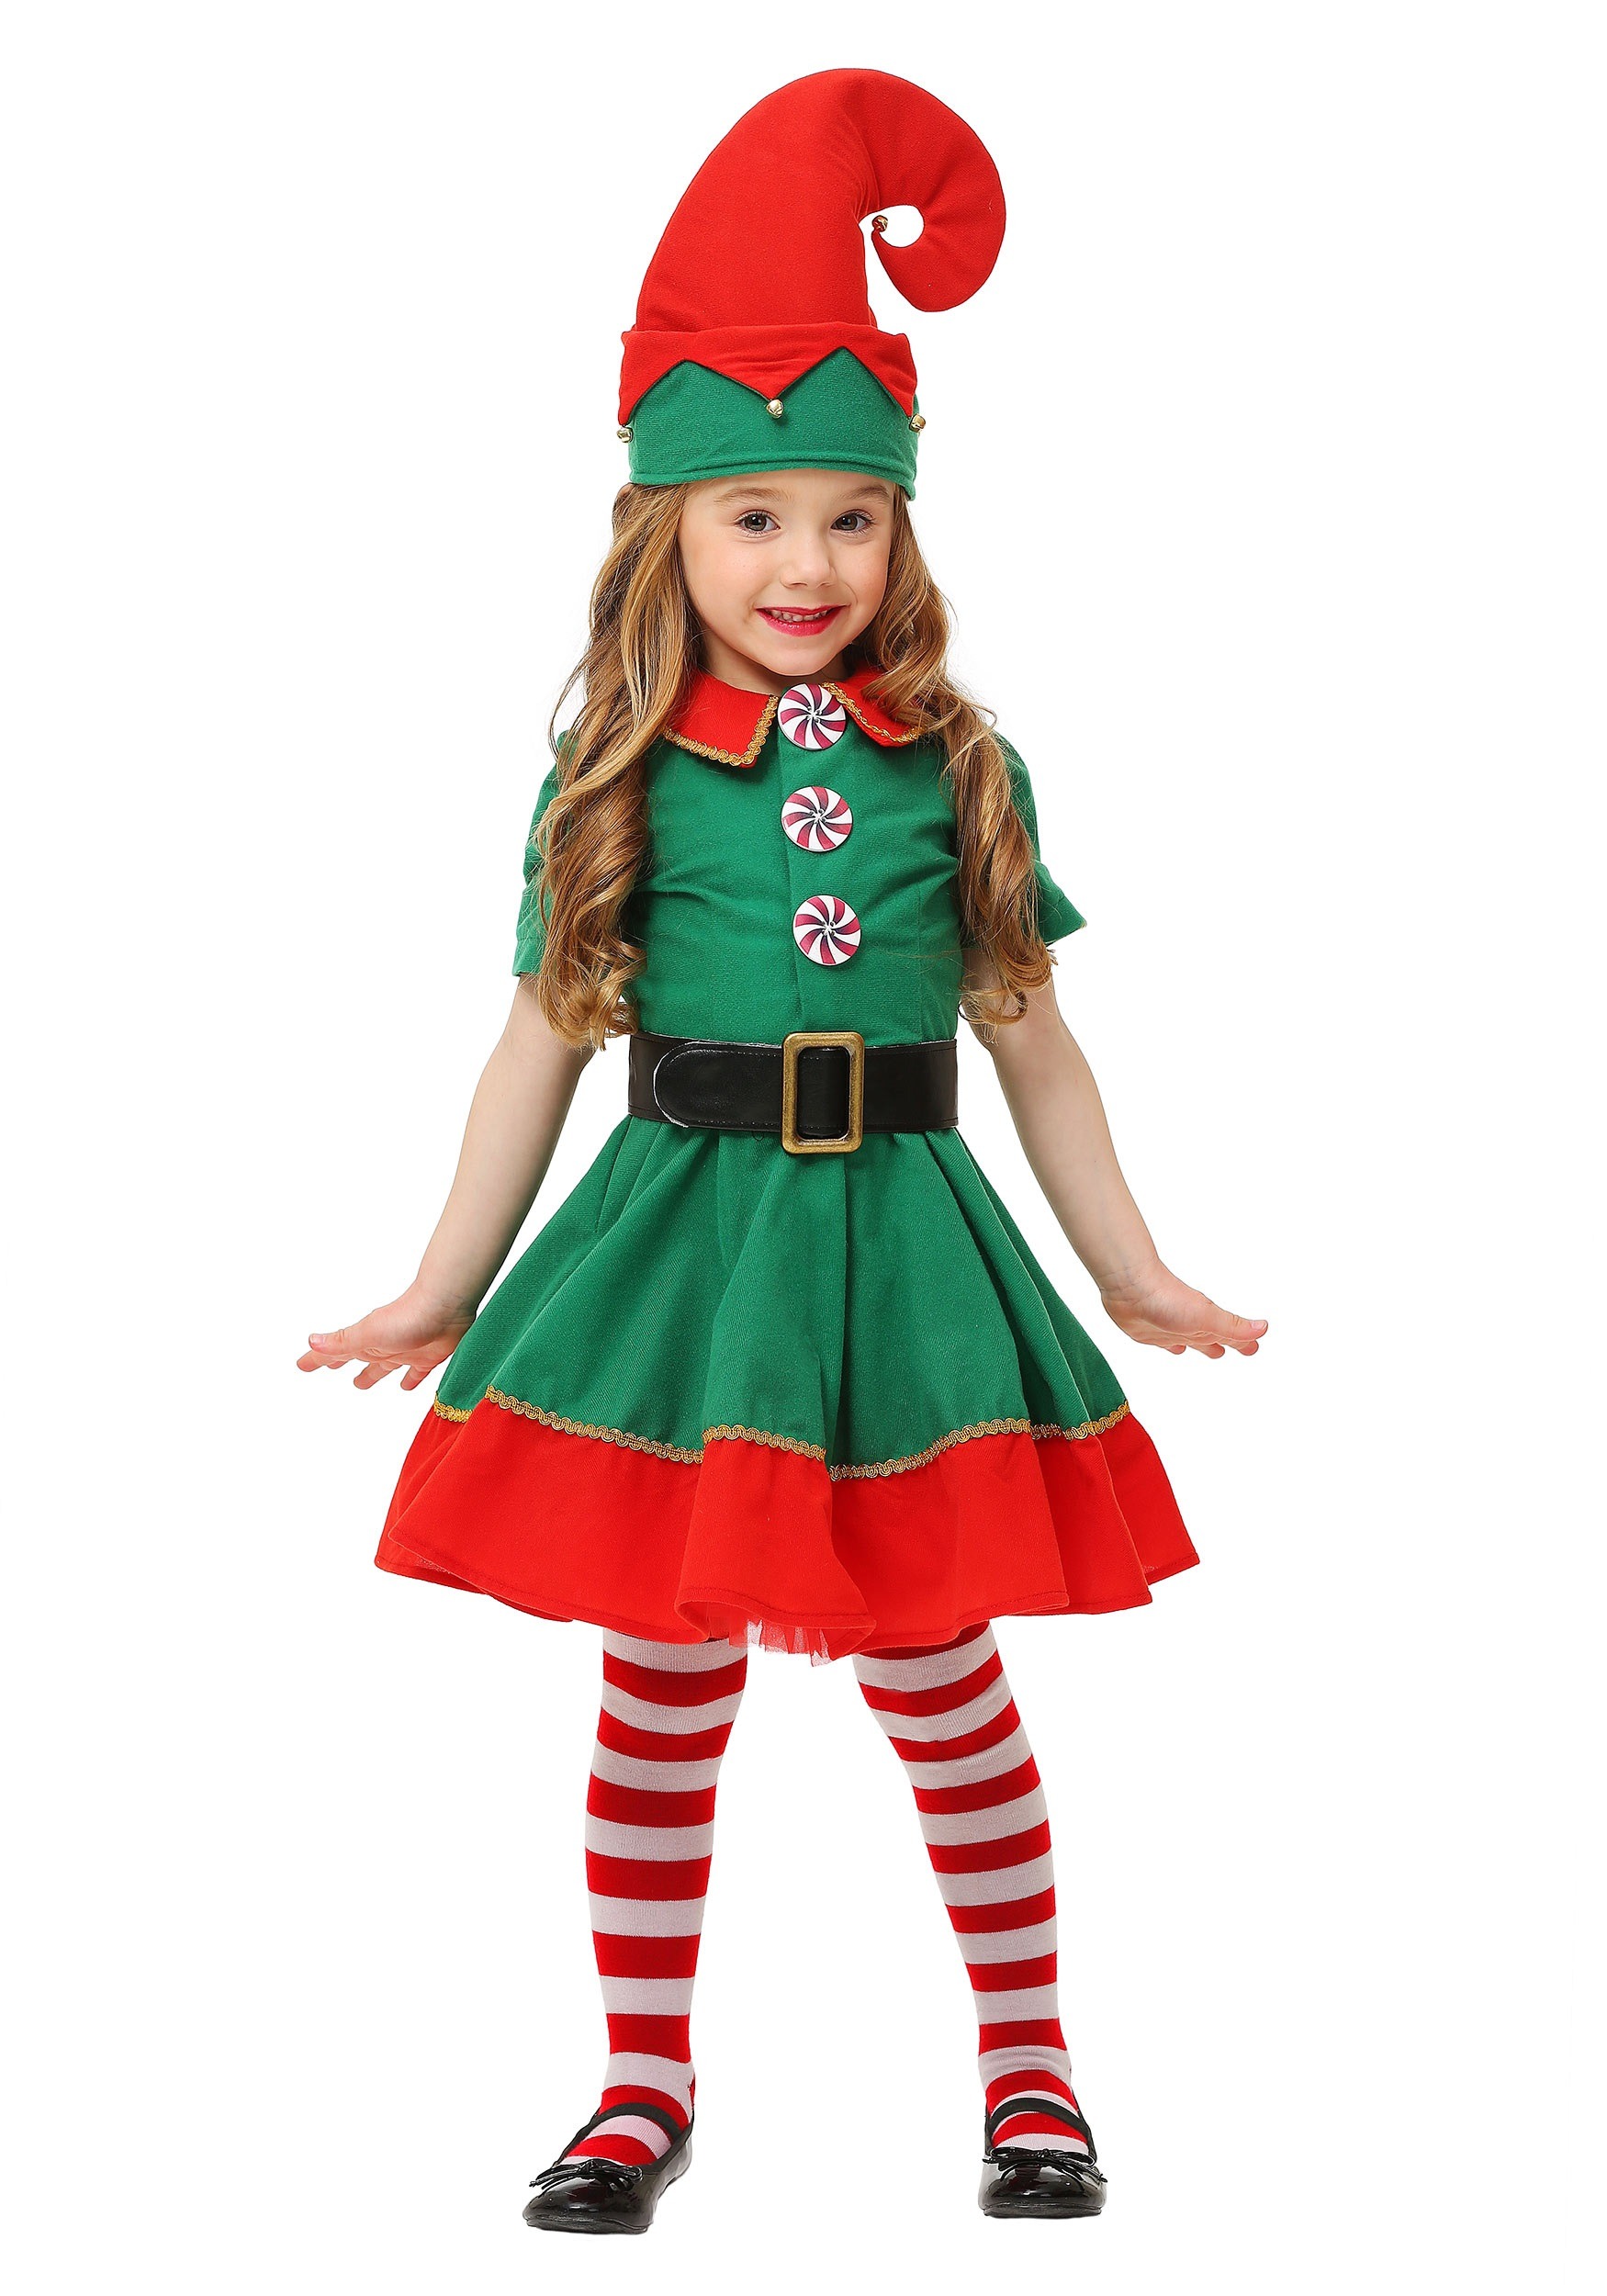 Photos - Fancy Dress Toddler FUN Costumes  Holiday Elf Costume Green/Red FUN2177TD 